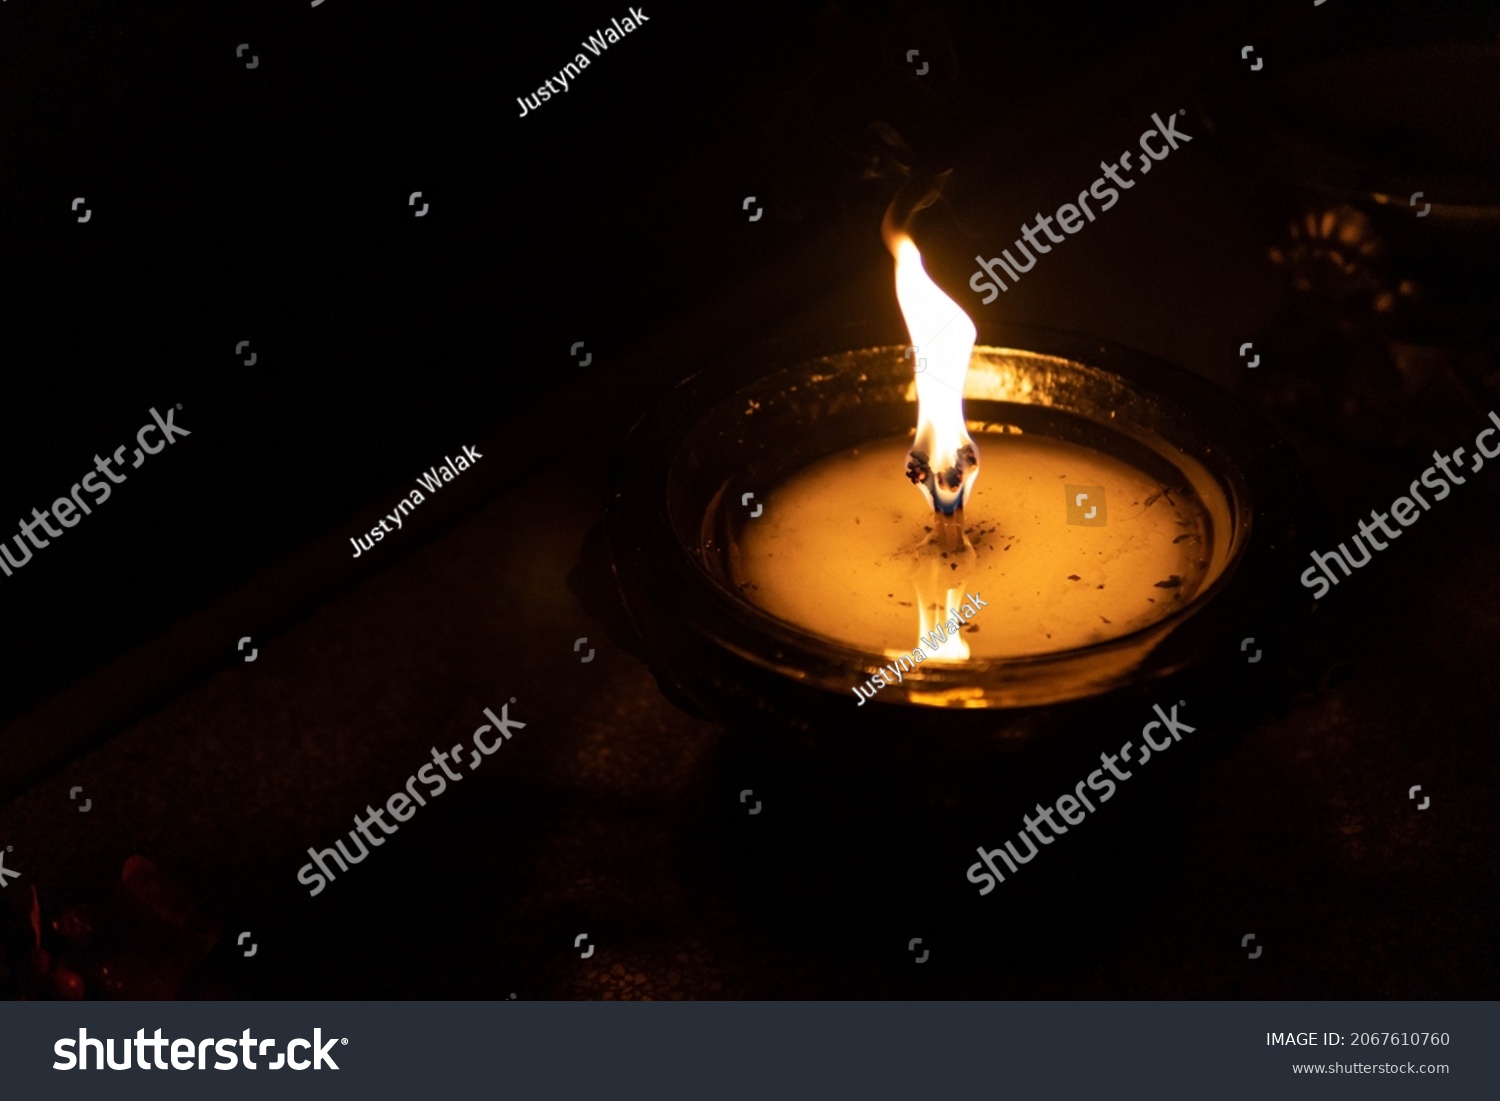 Flame of a candle on a grave. All Saints day. Votive candle on a dark background. All Saints Day 1st November. All Souls Day 2nd November. The Day of The Dead. #2067610760